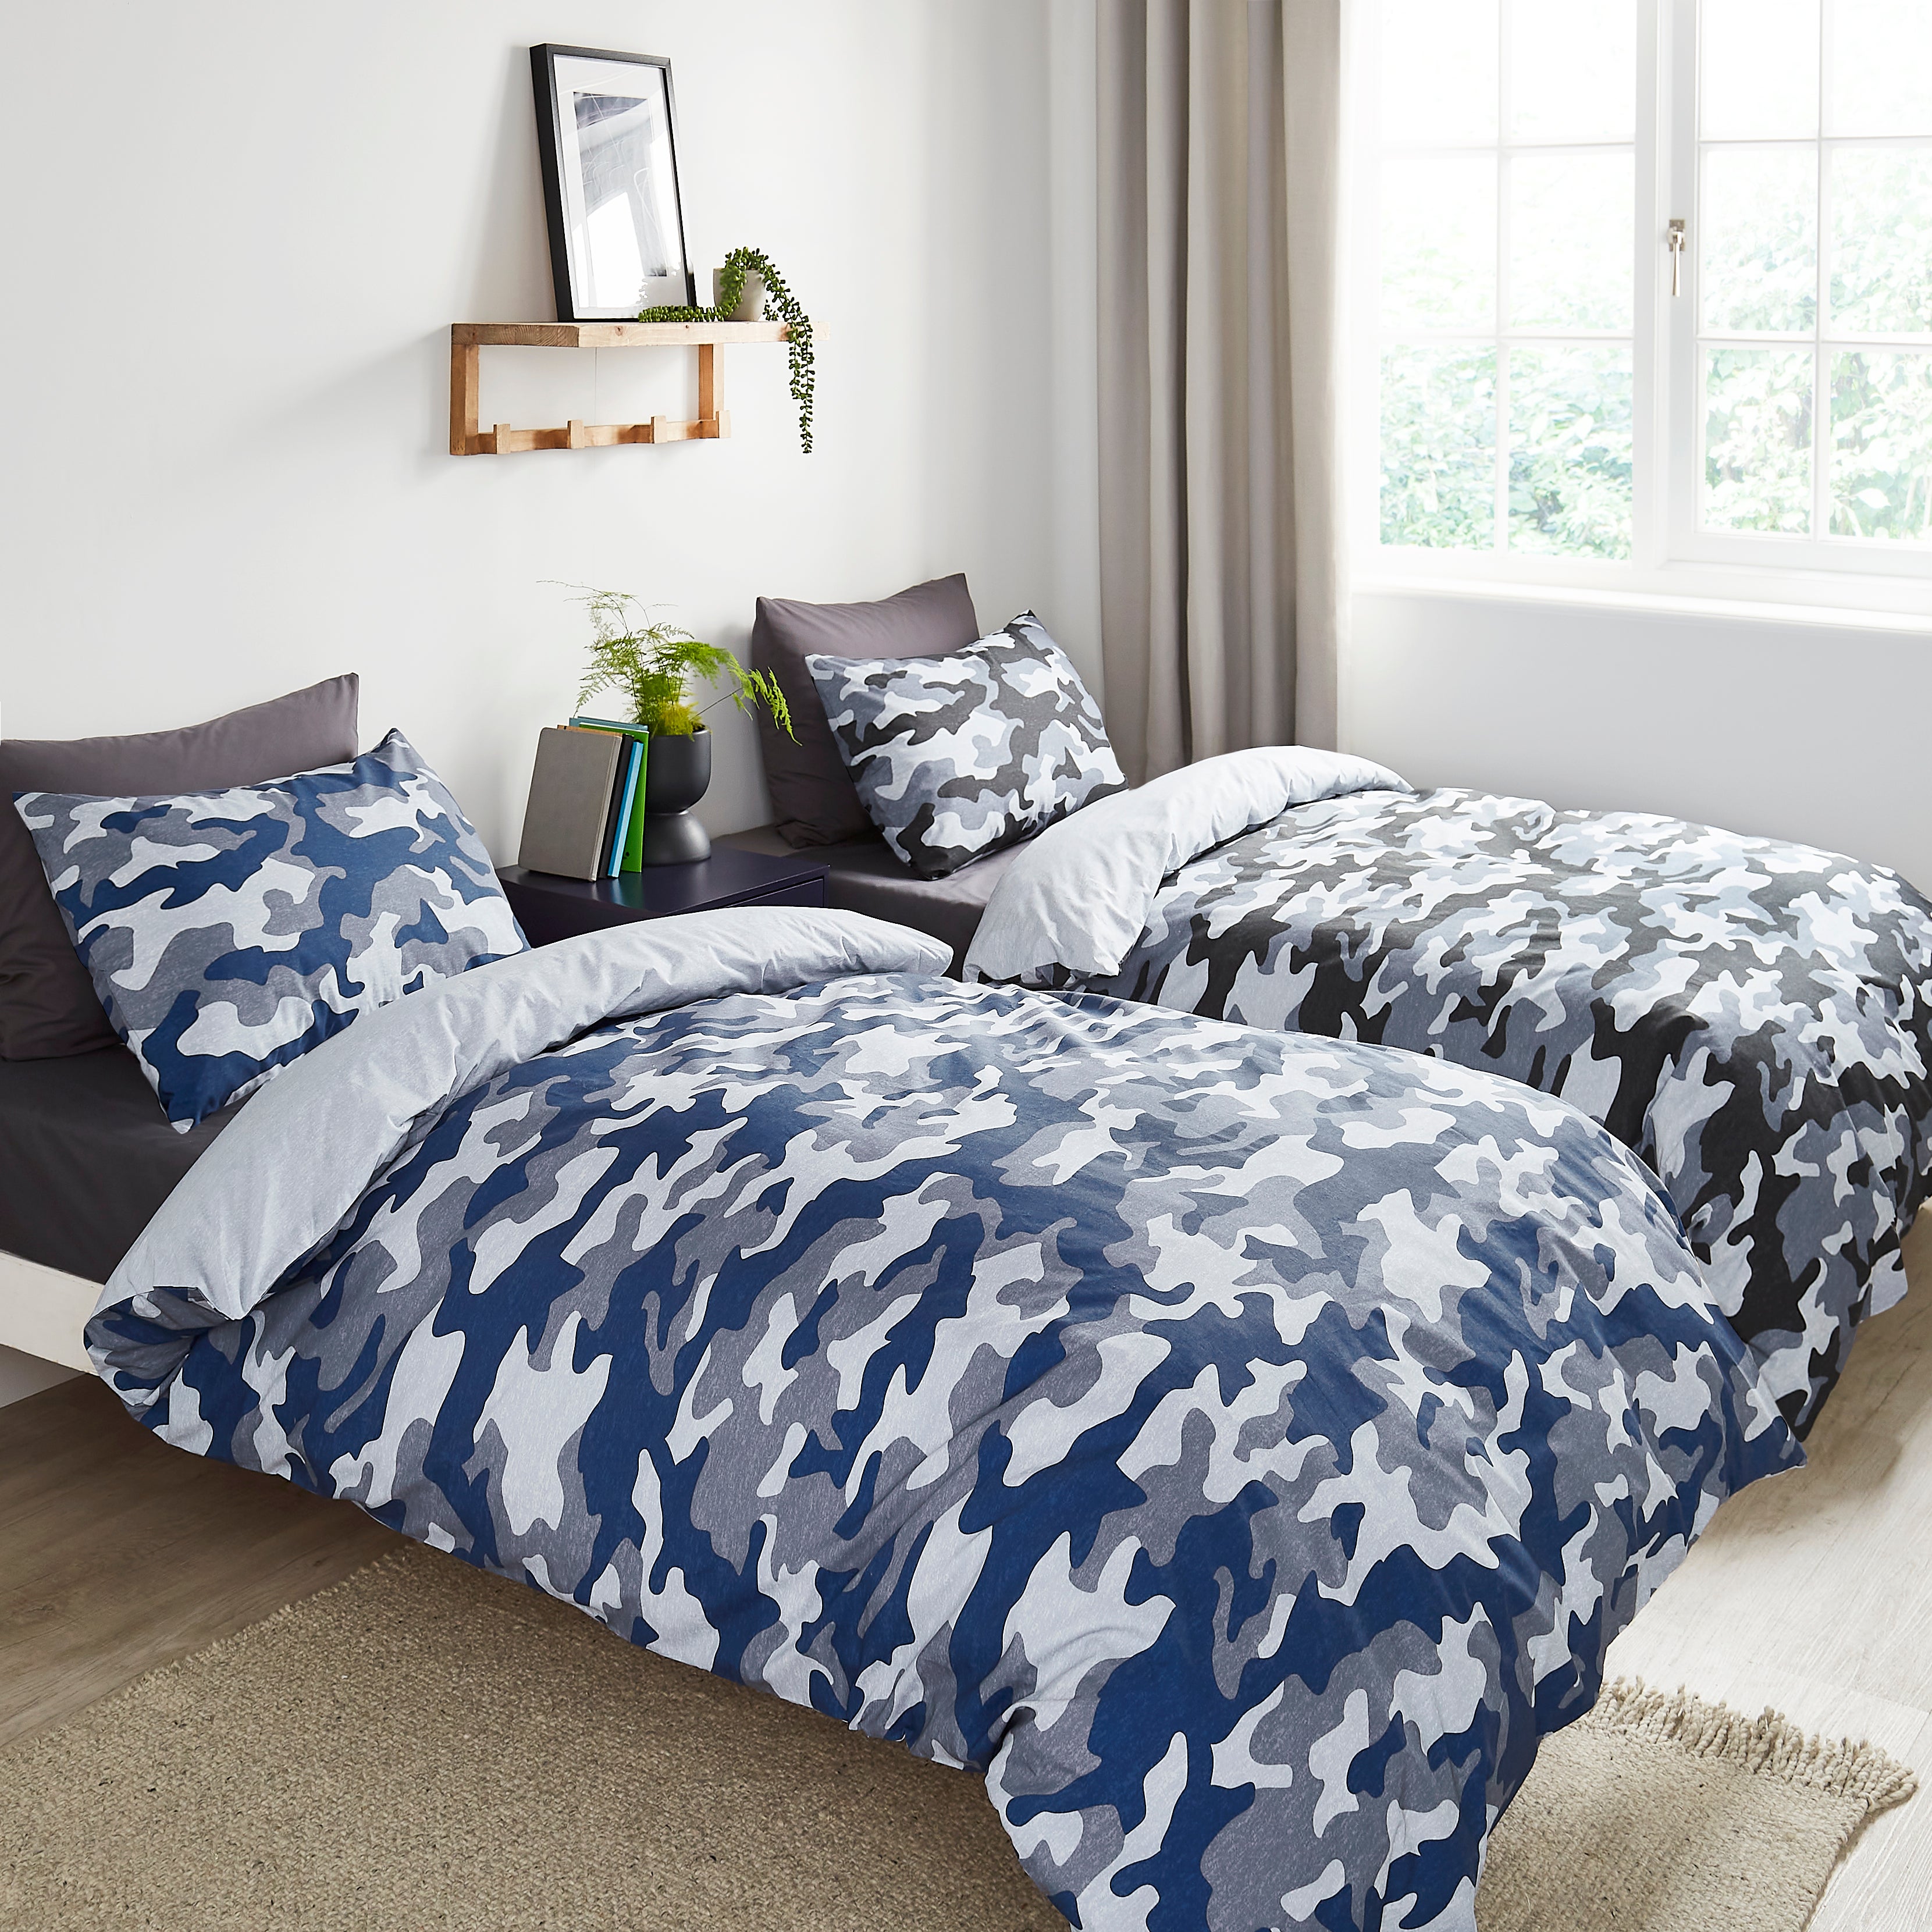 Camo Duvet Cover And Pillowcase Twin Pack Set Greybluewhite